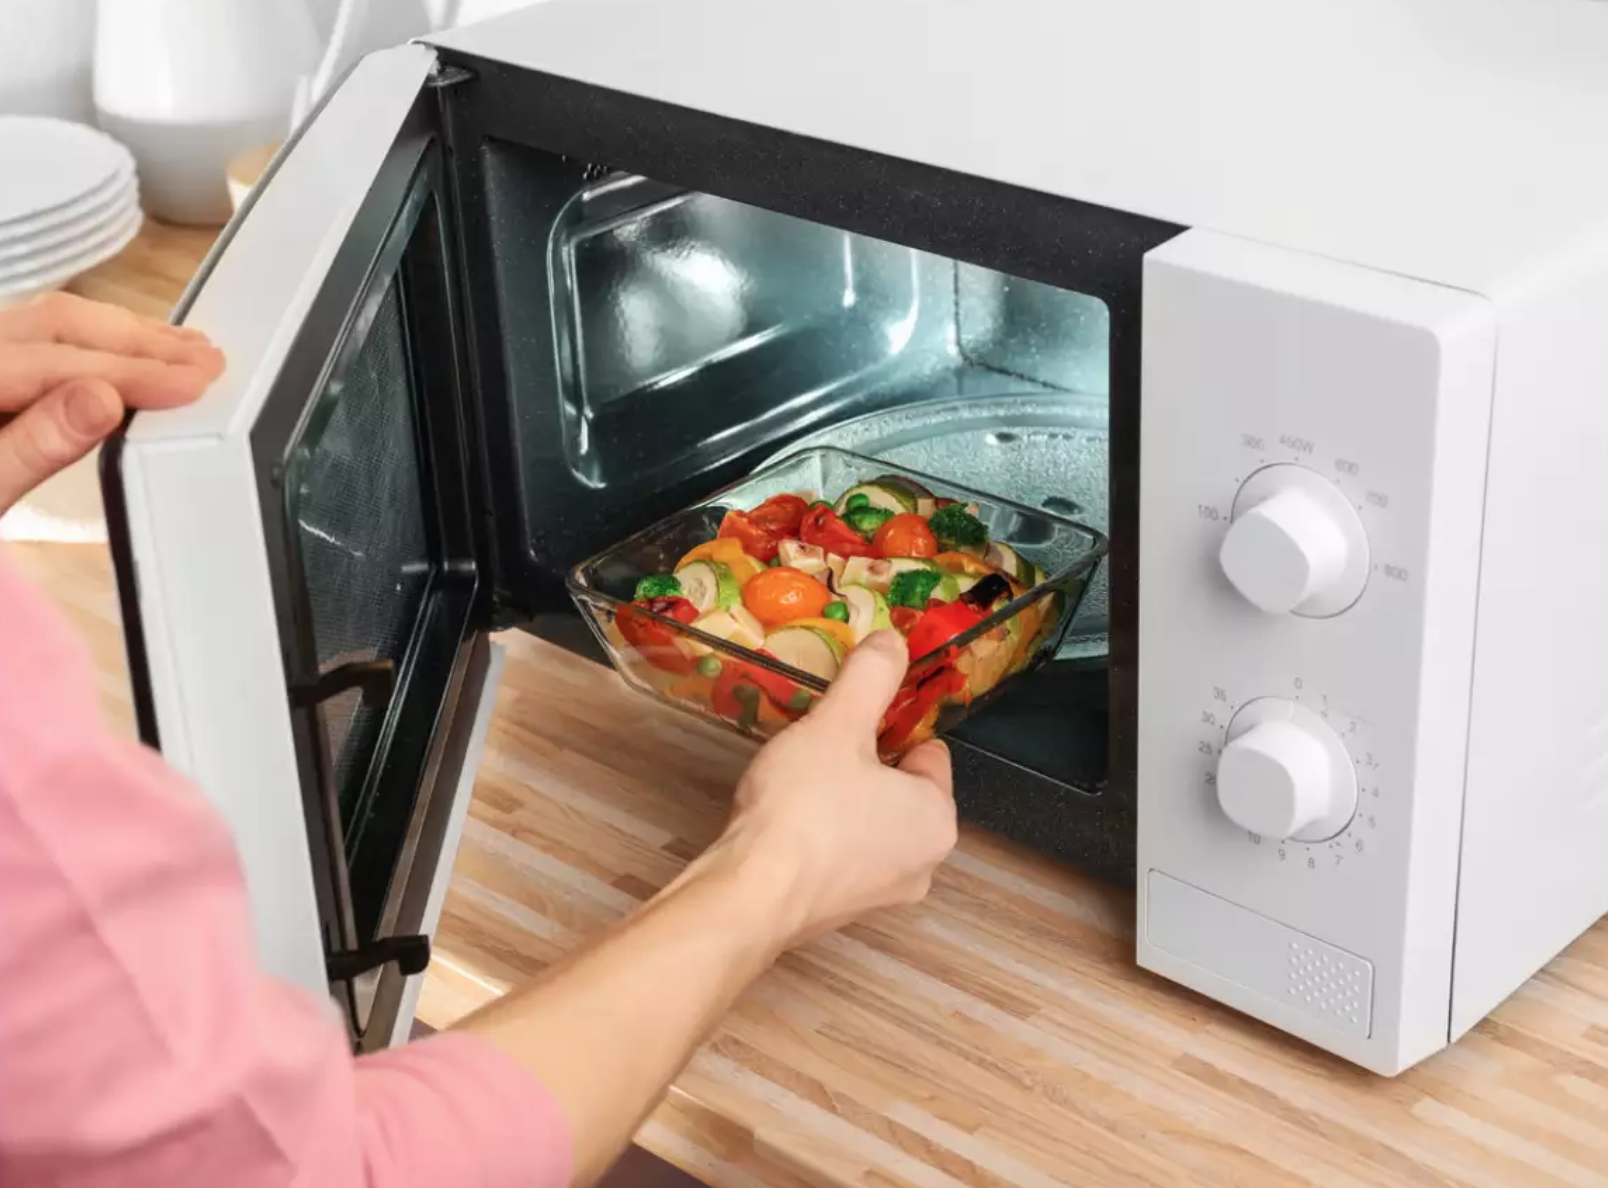 Microwaving food is bad and dangerous for health?